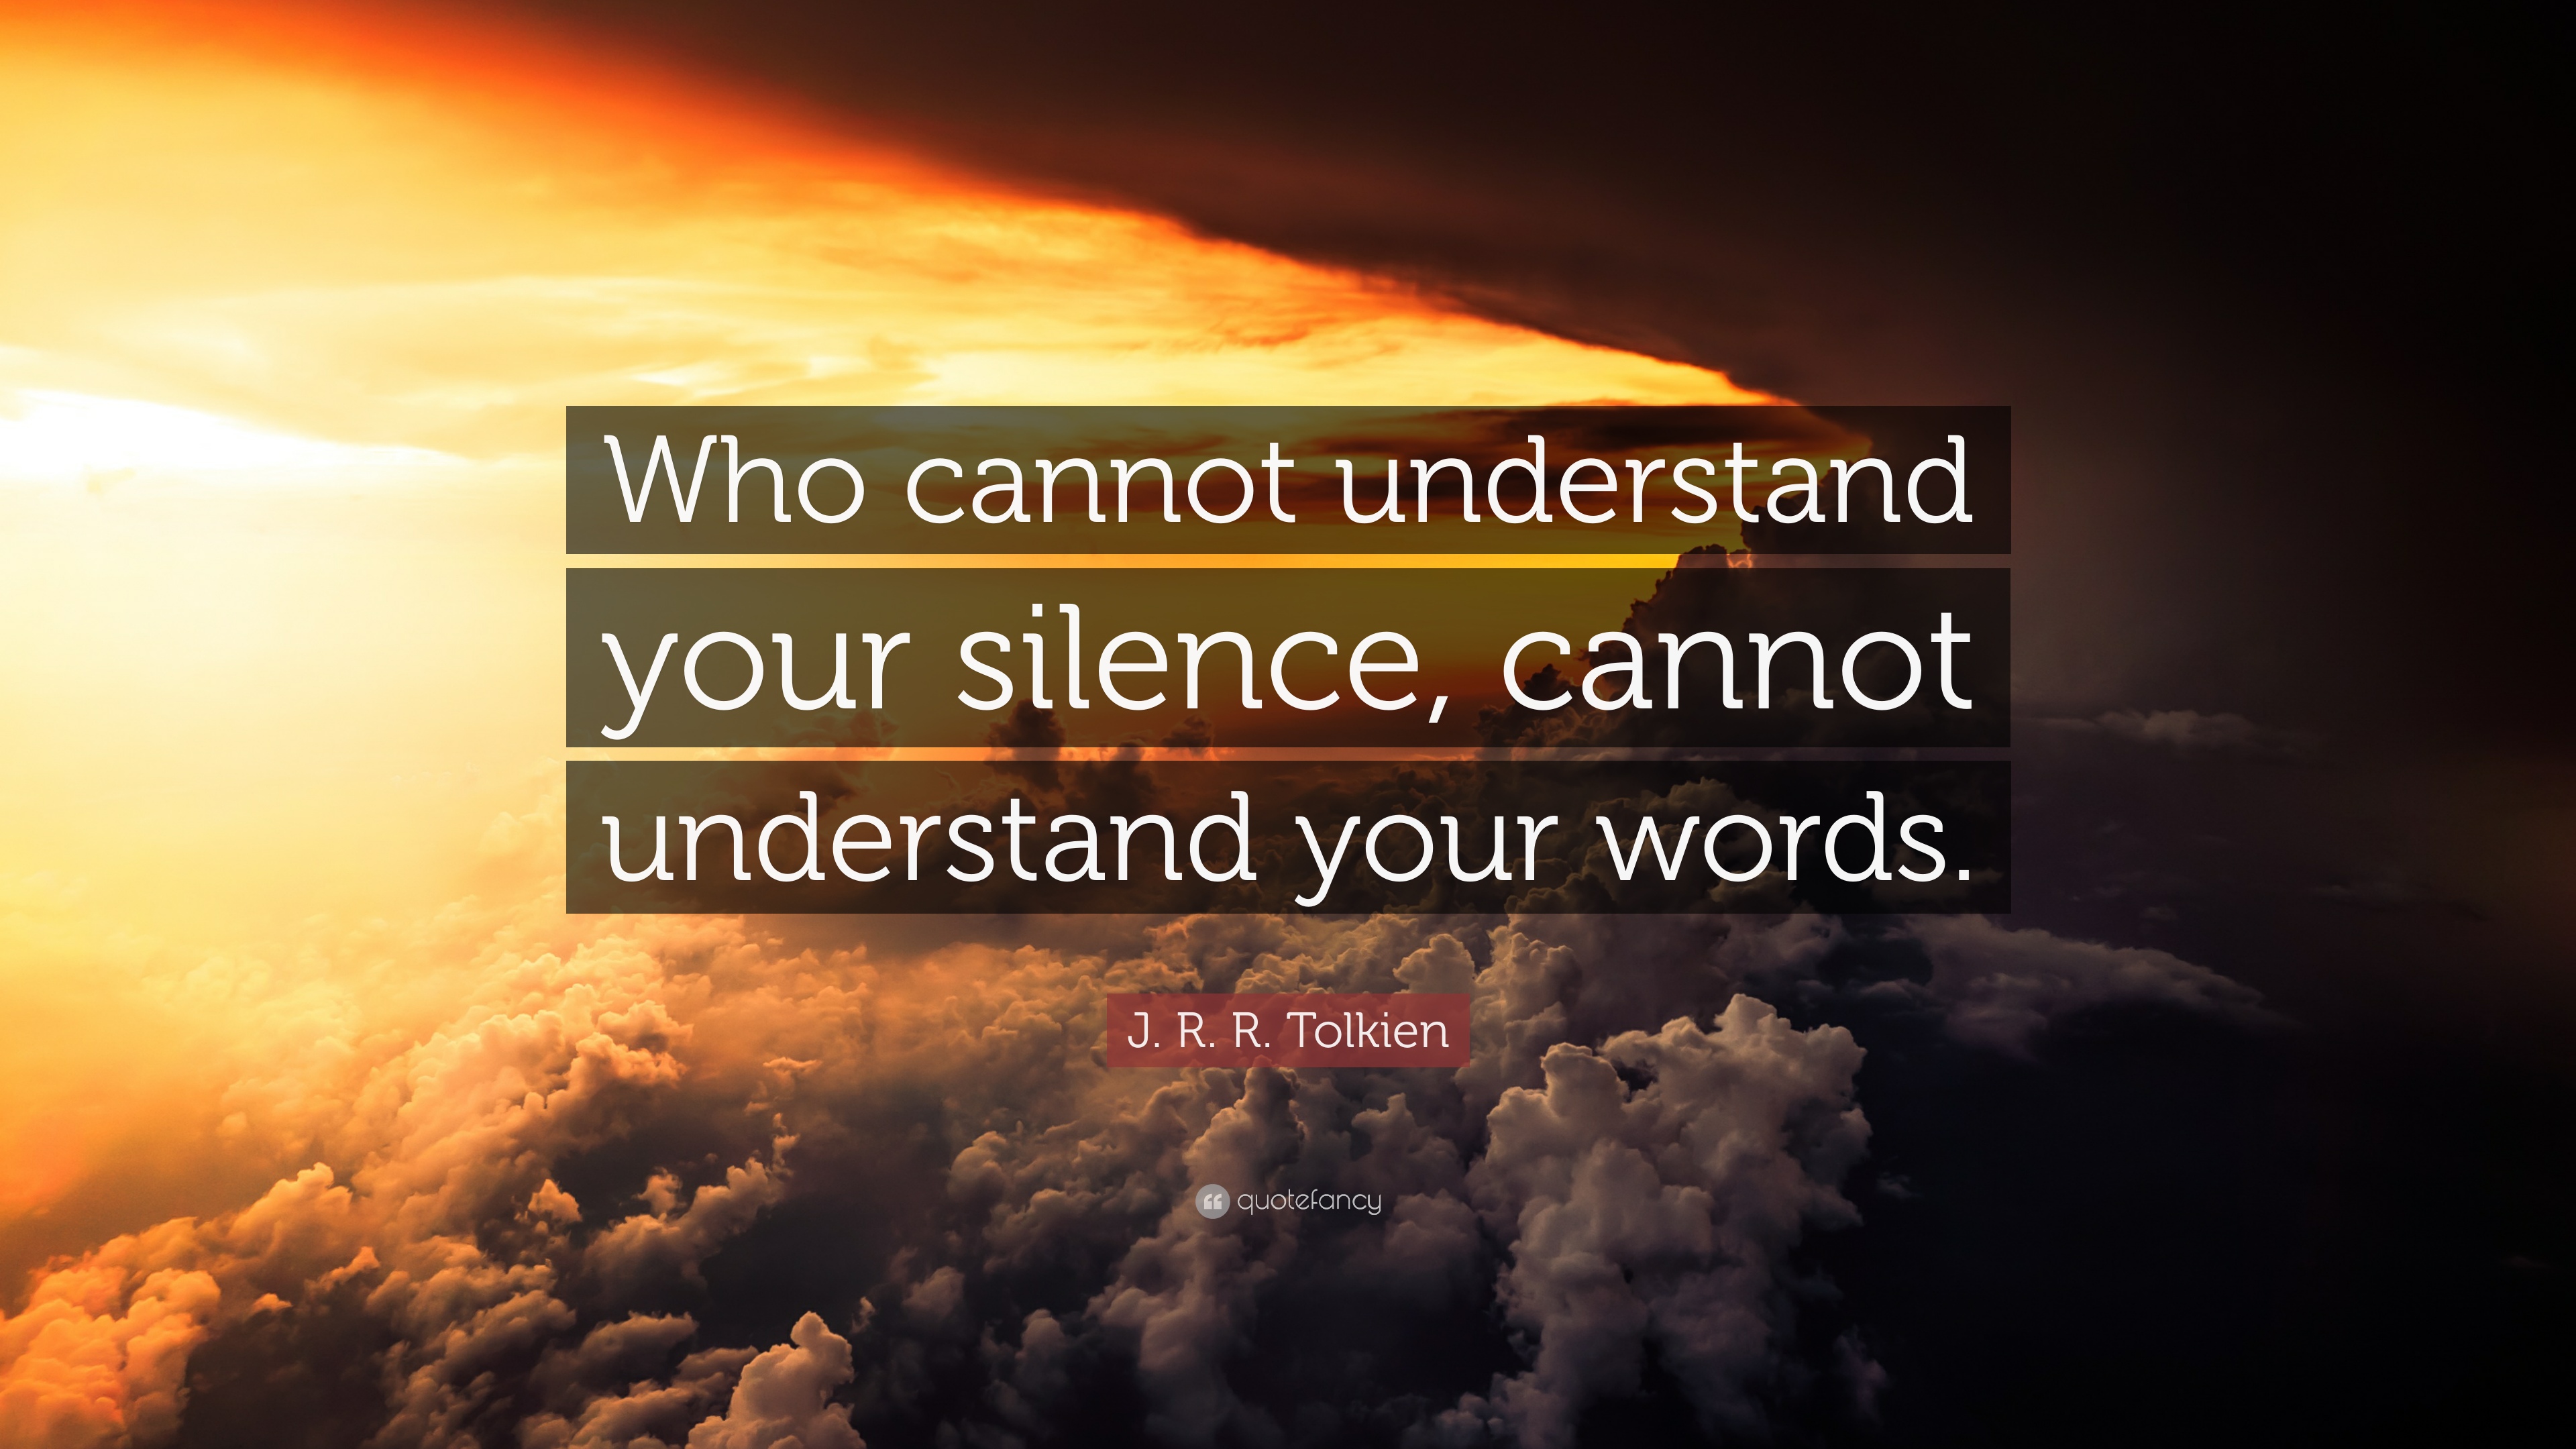 Silence Wallpapers Quotes